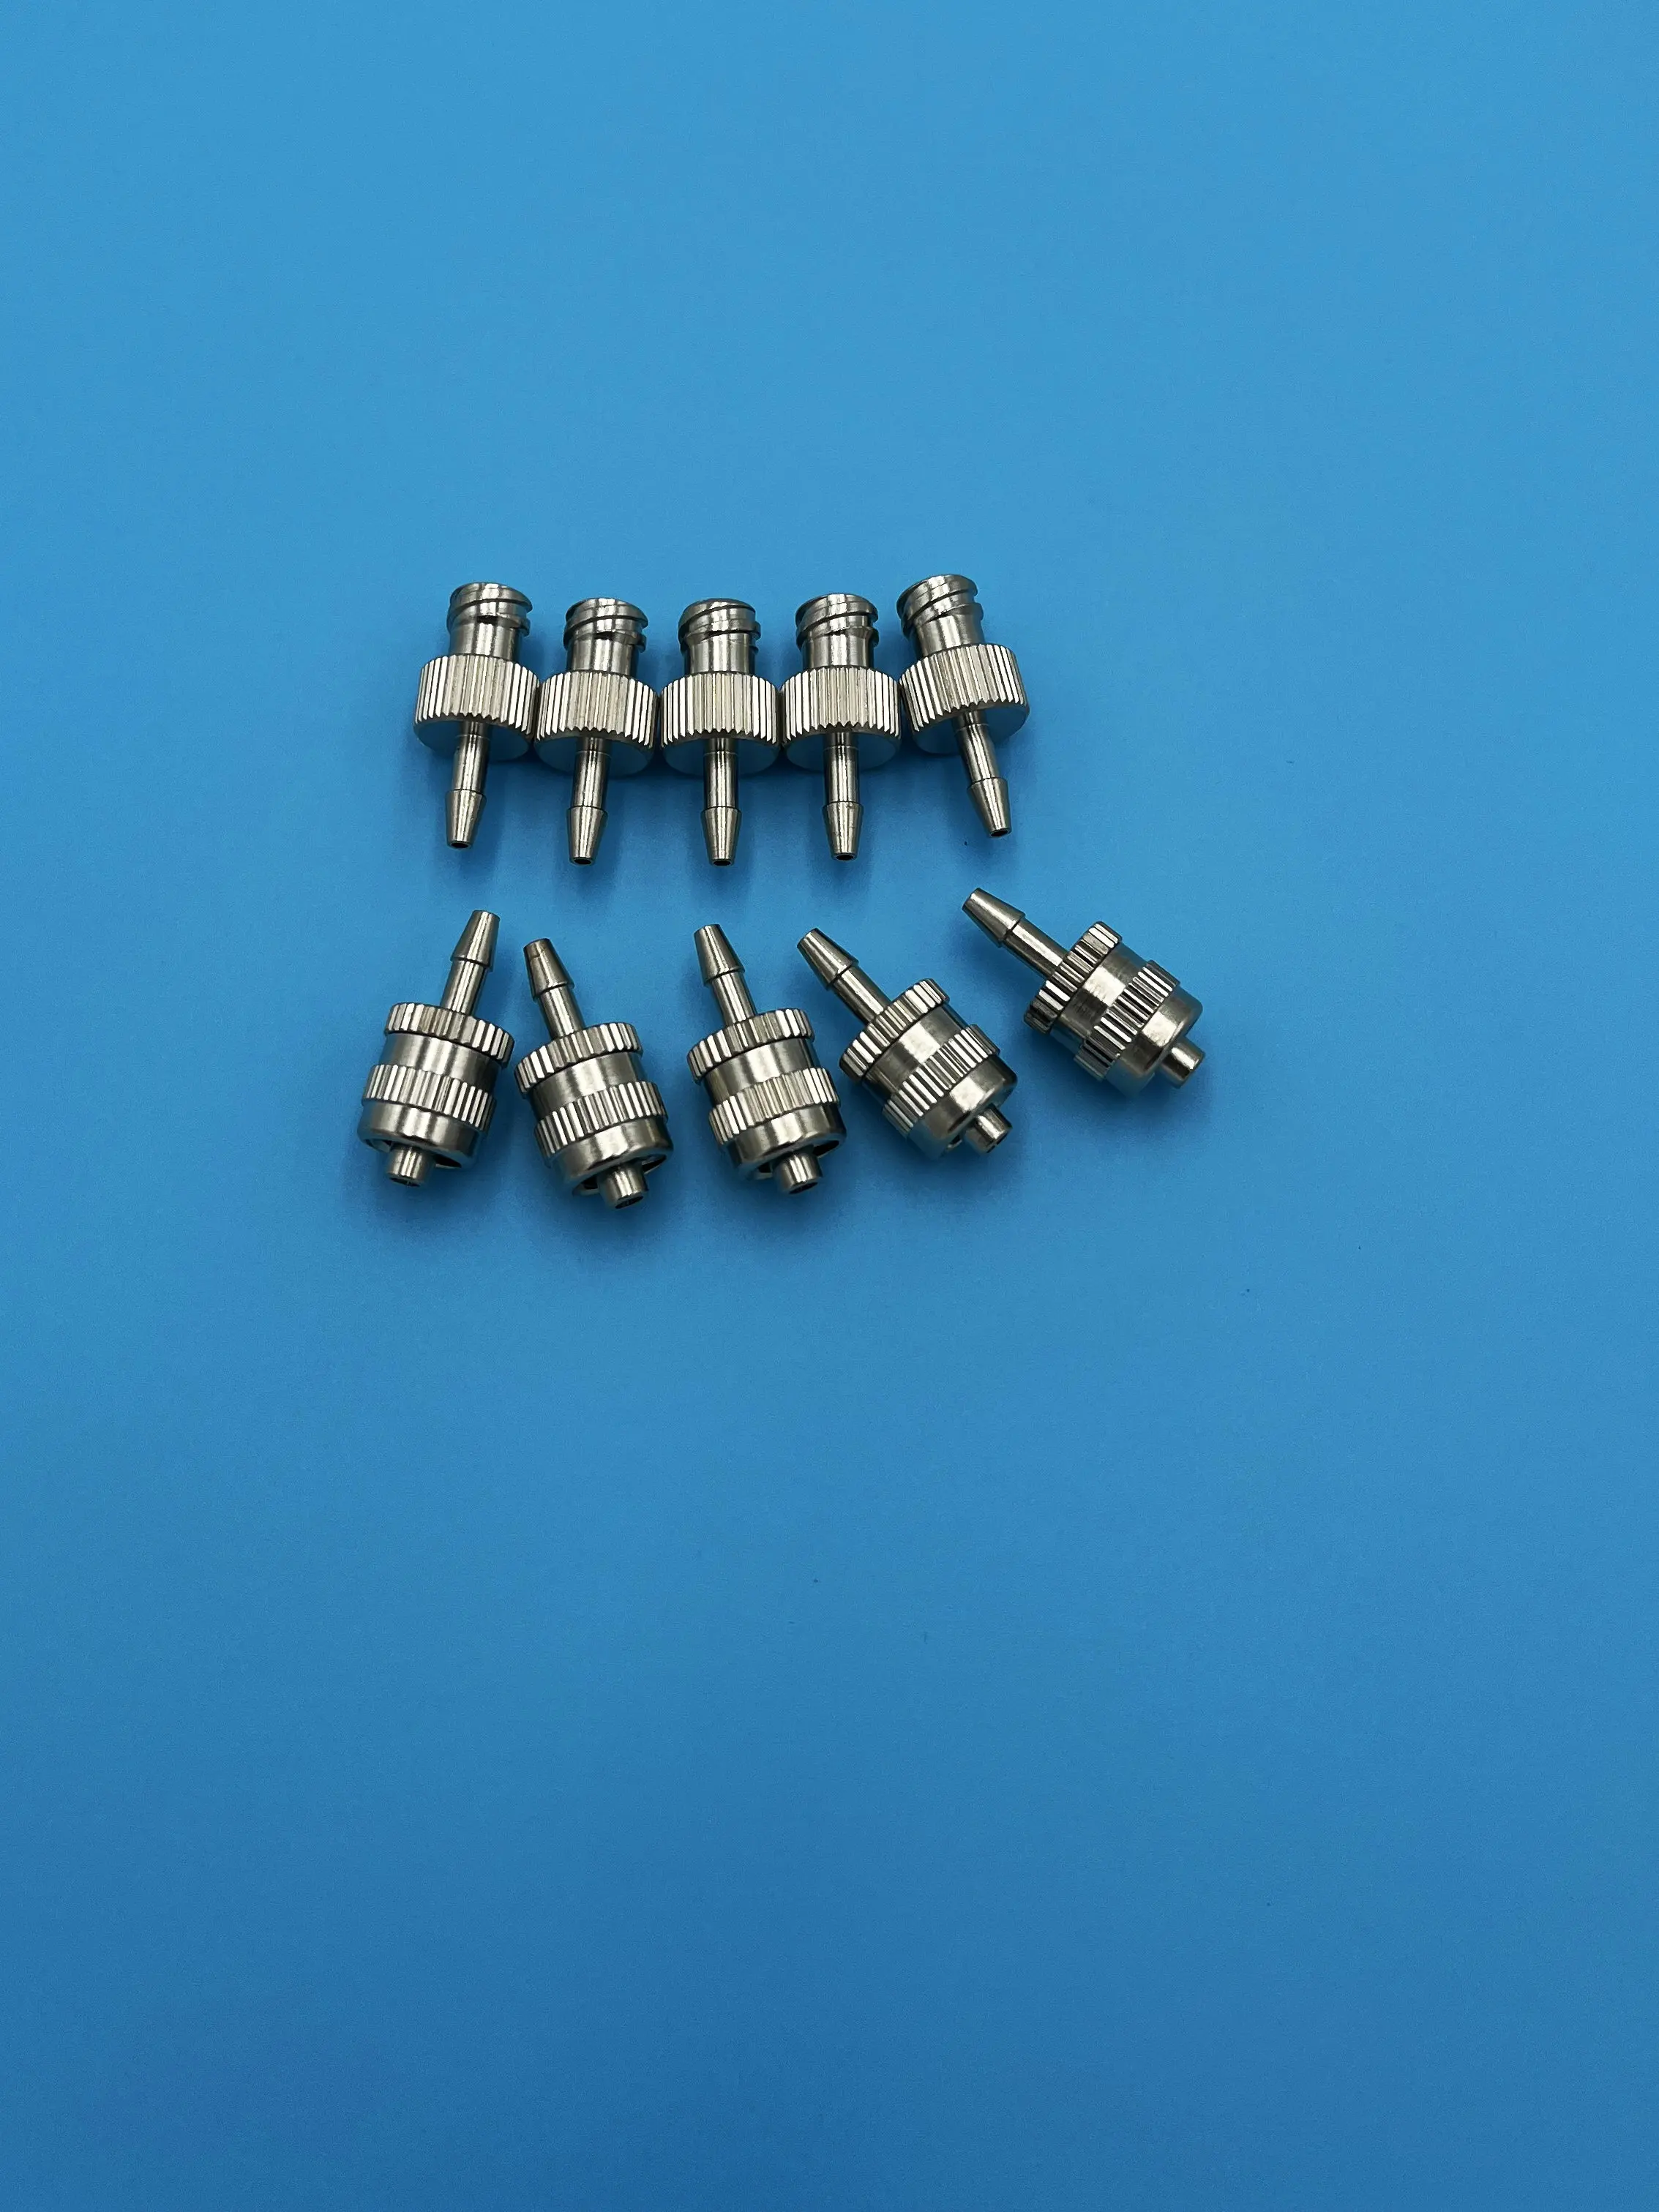 1Pc Female Male Luer Syringe Fitting (metal) ,Luer Lock Fitting Connector